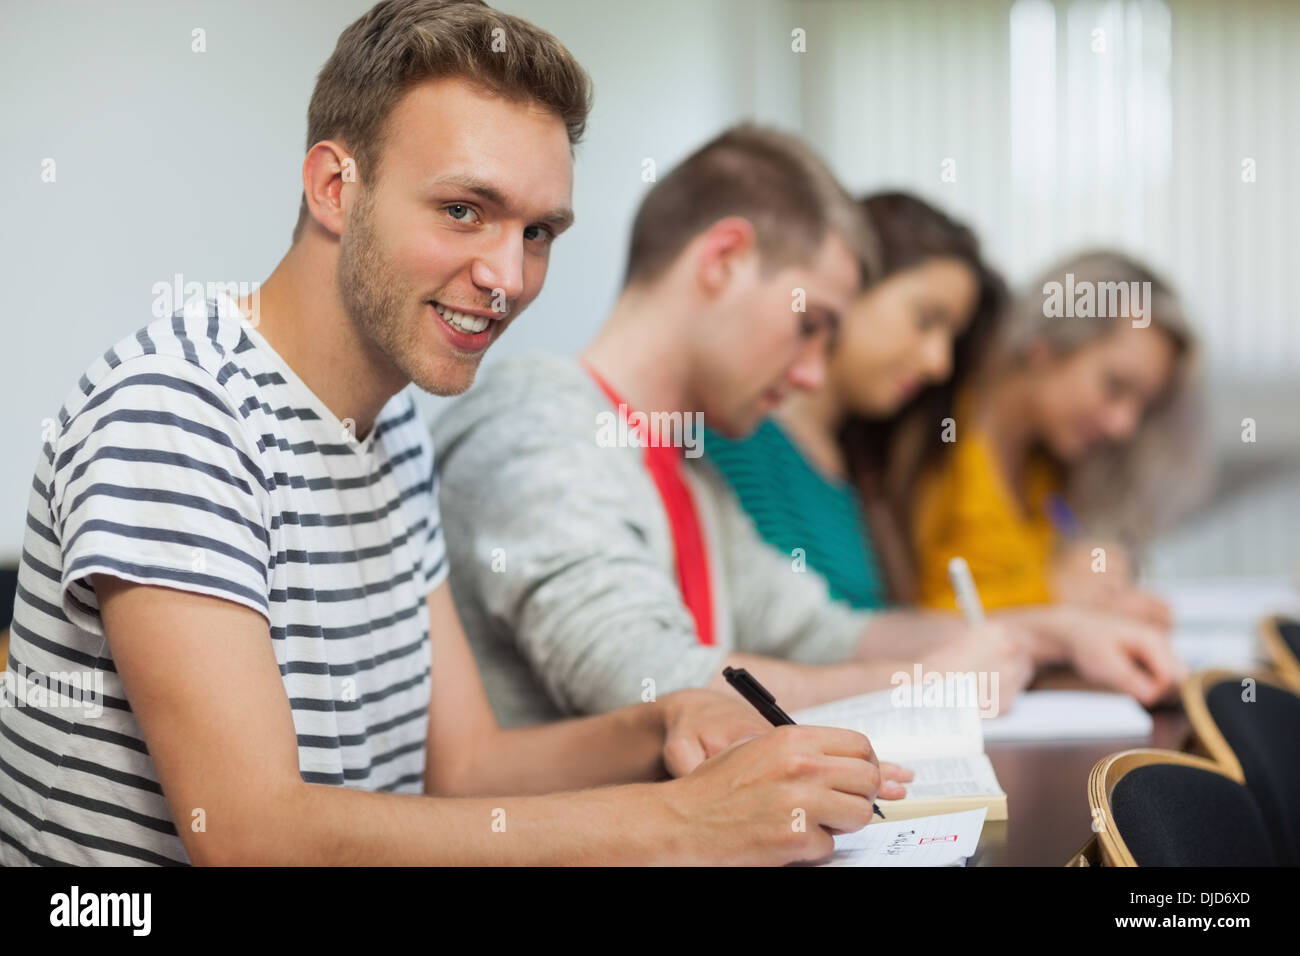 Smiling handsome student looking at camera Stock Photo